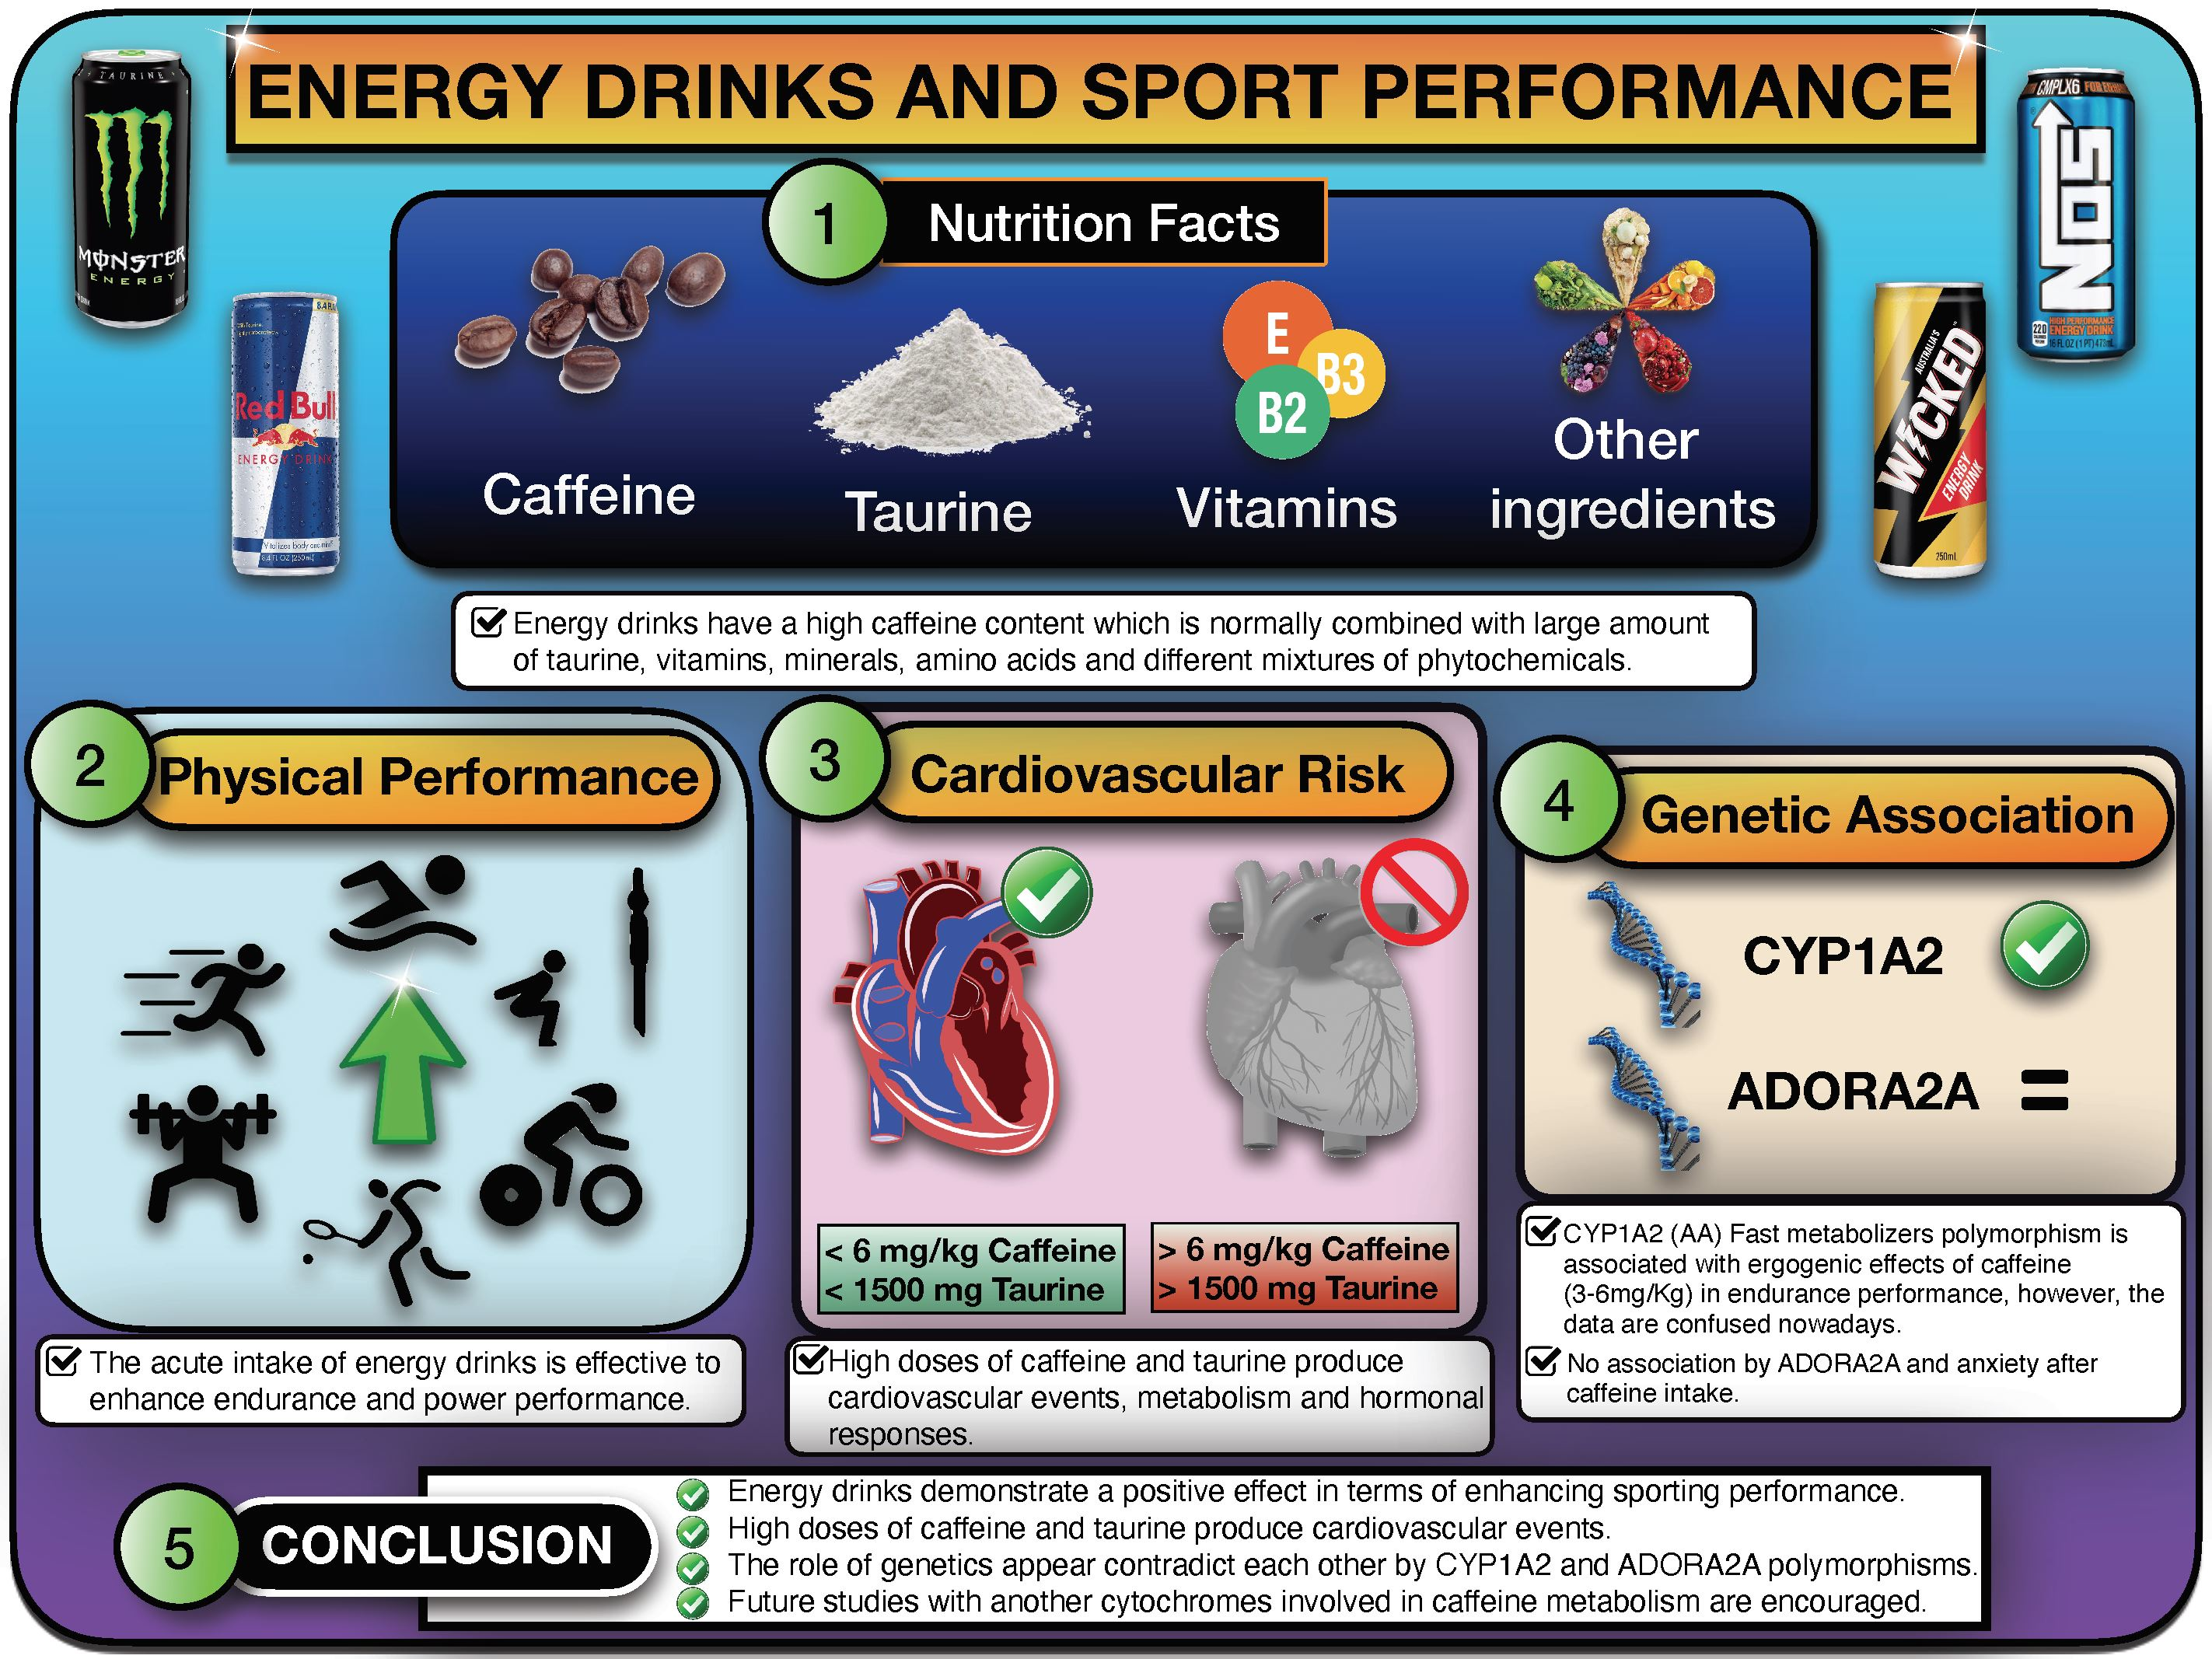 Nutrients Free Full-Text Energy Drinks and Sports Performance, Cardiovascular Risk, and Genetic Associations; Future Prospects